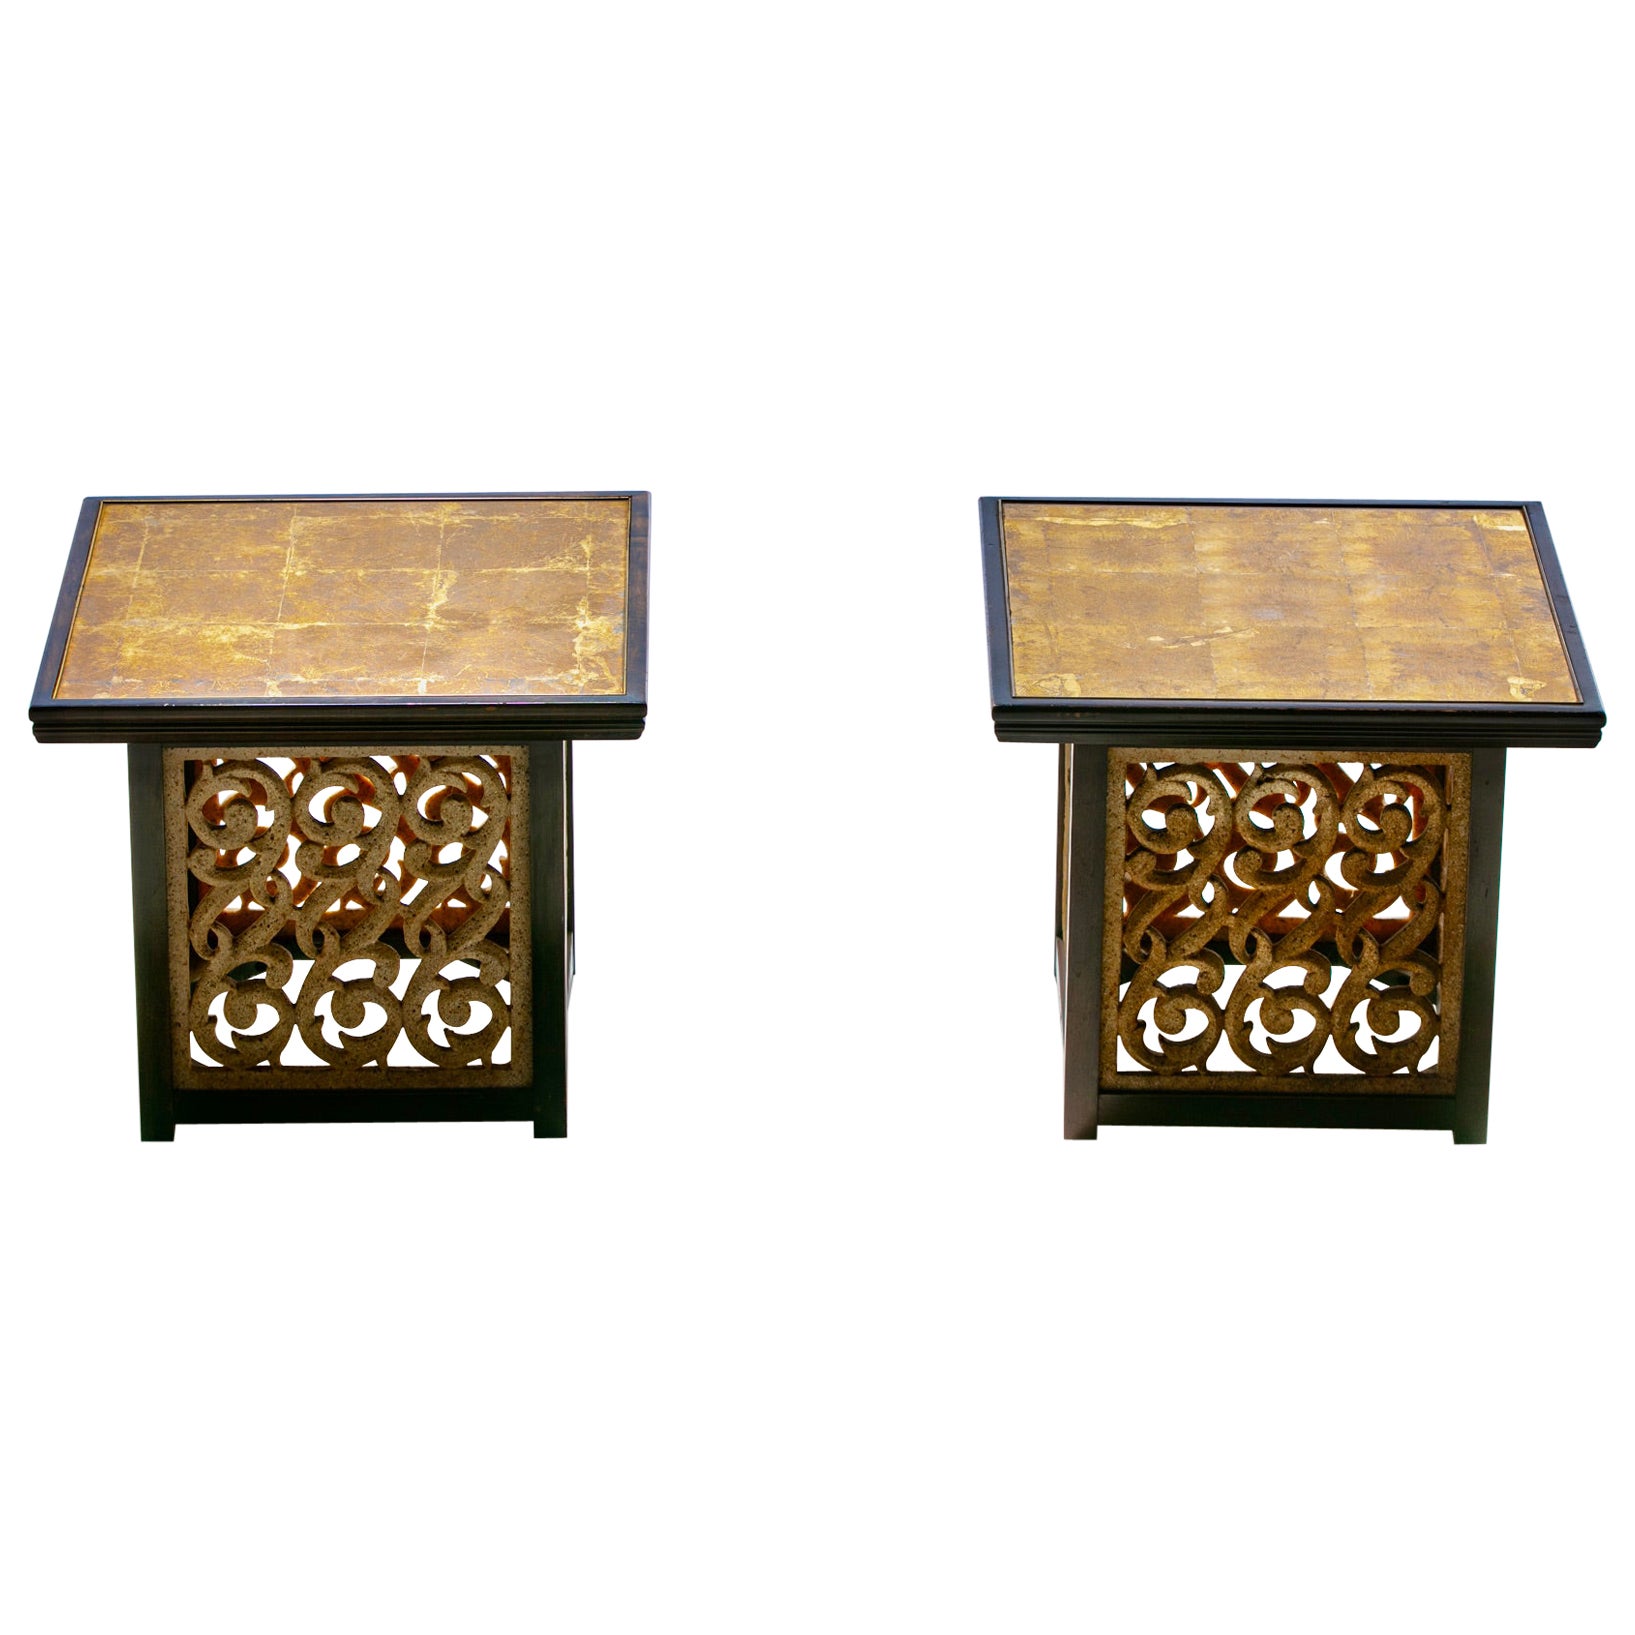 Pair of Widdicomb End Tables with Verre Églomisé Top and Resin Sides, circa 1960